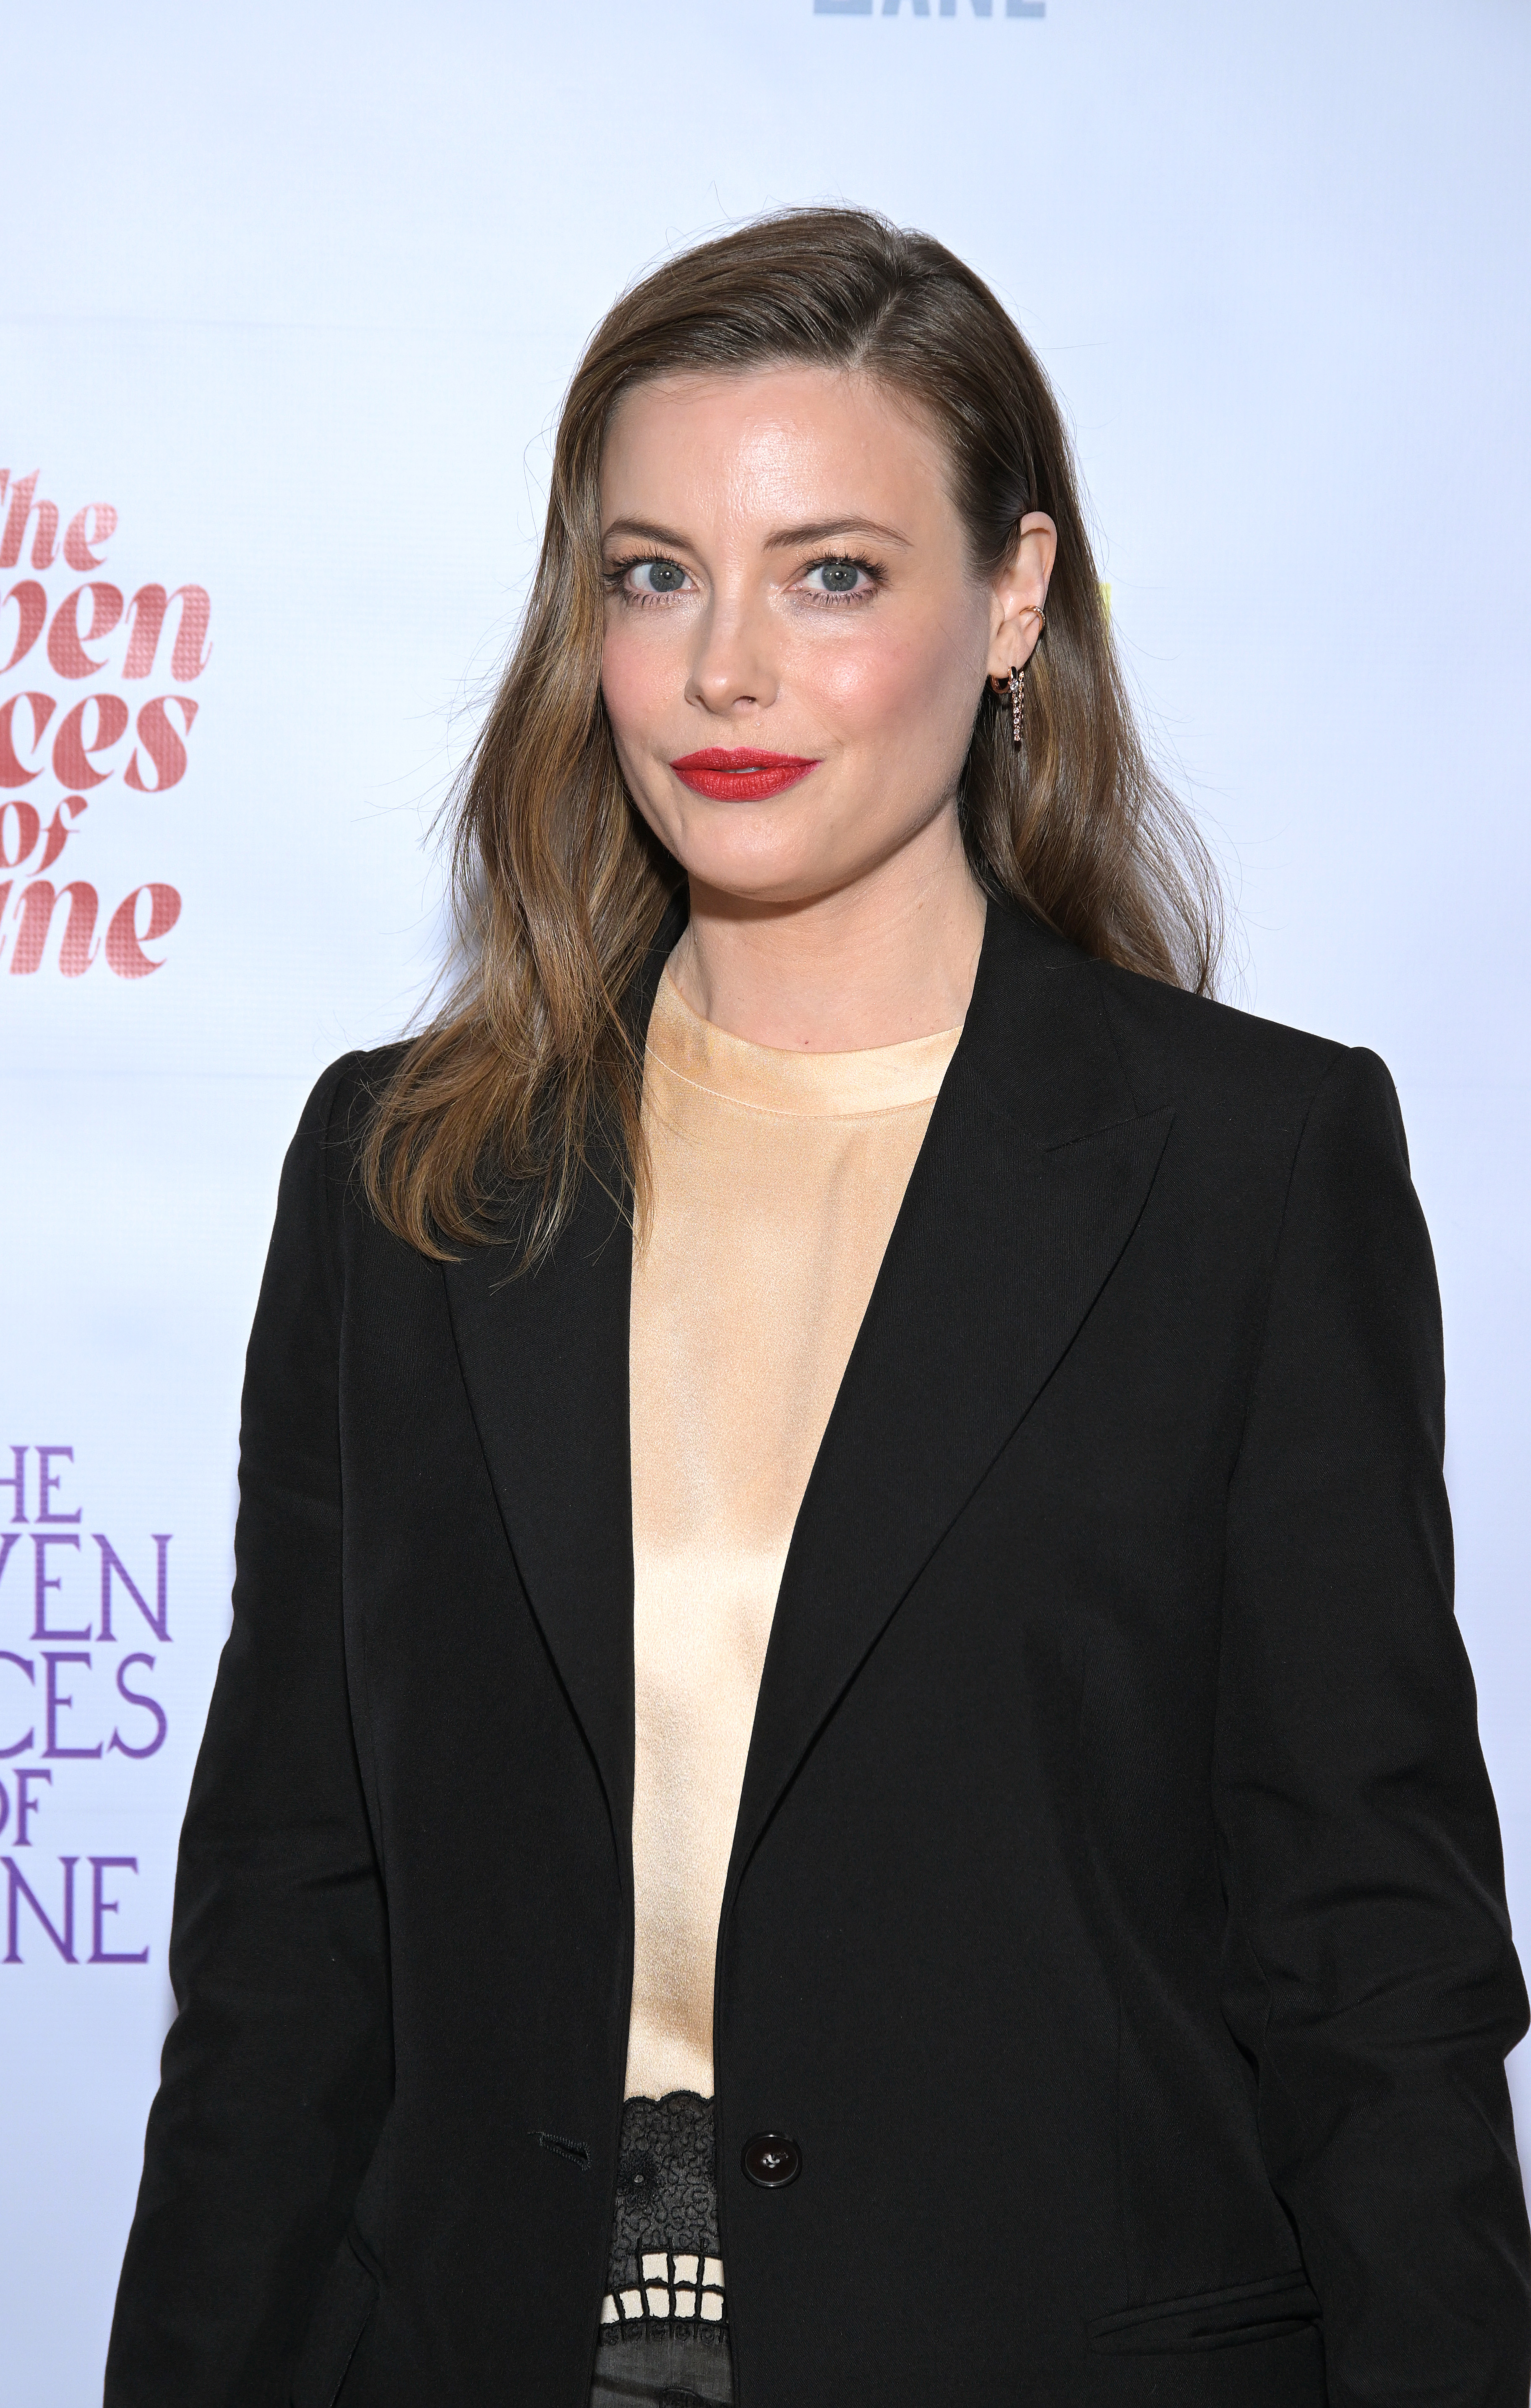 Gillian Jacobs at the screening of "The Seven Faces Of Jane" on January 13, 2023, in California | Source: Getty Images